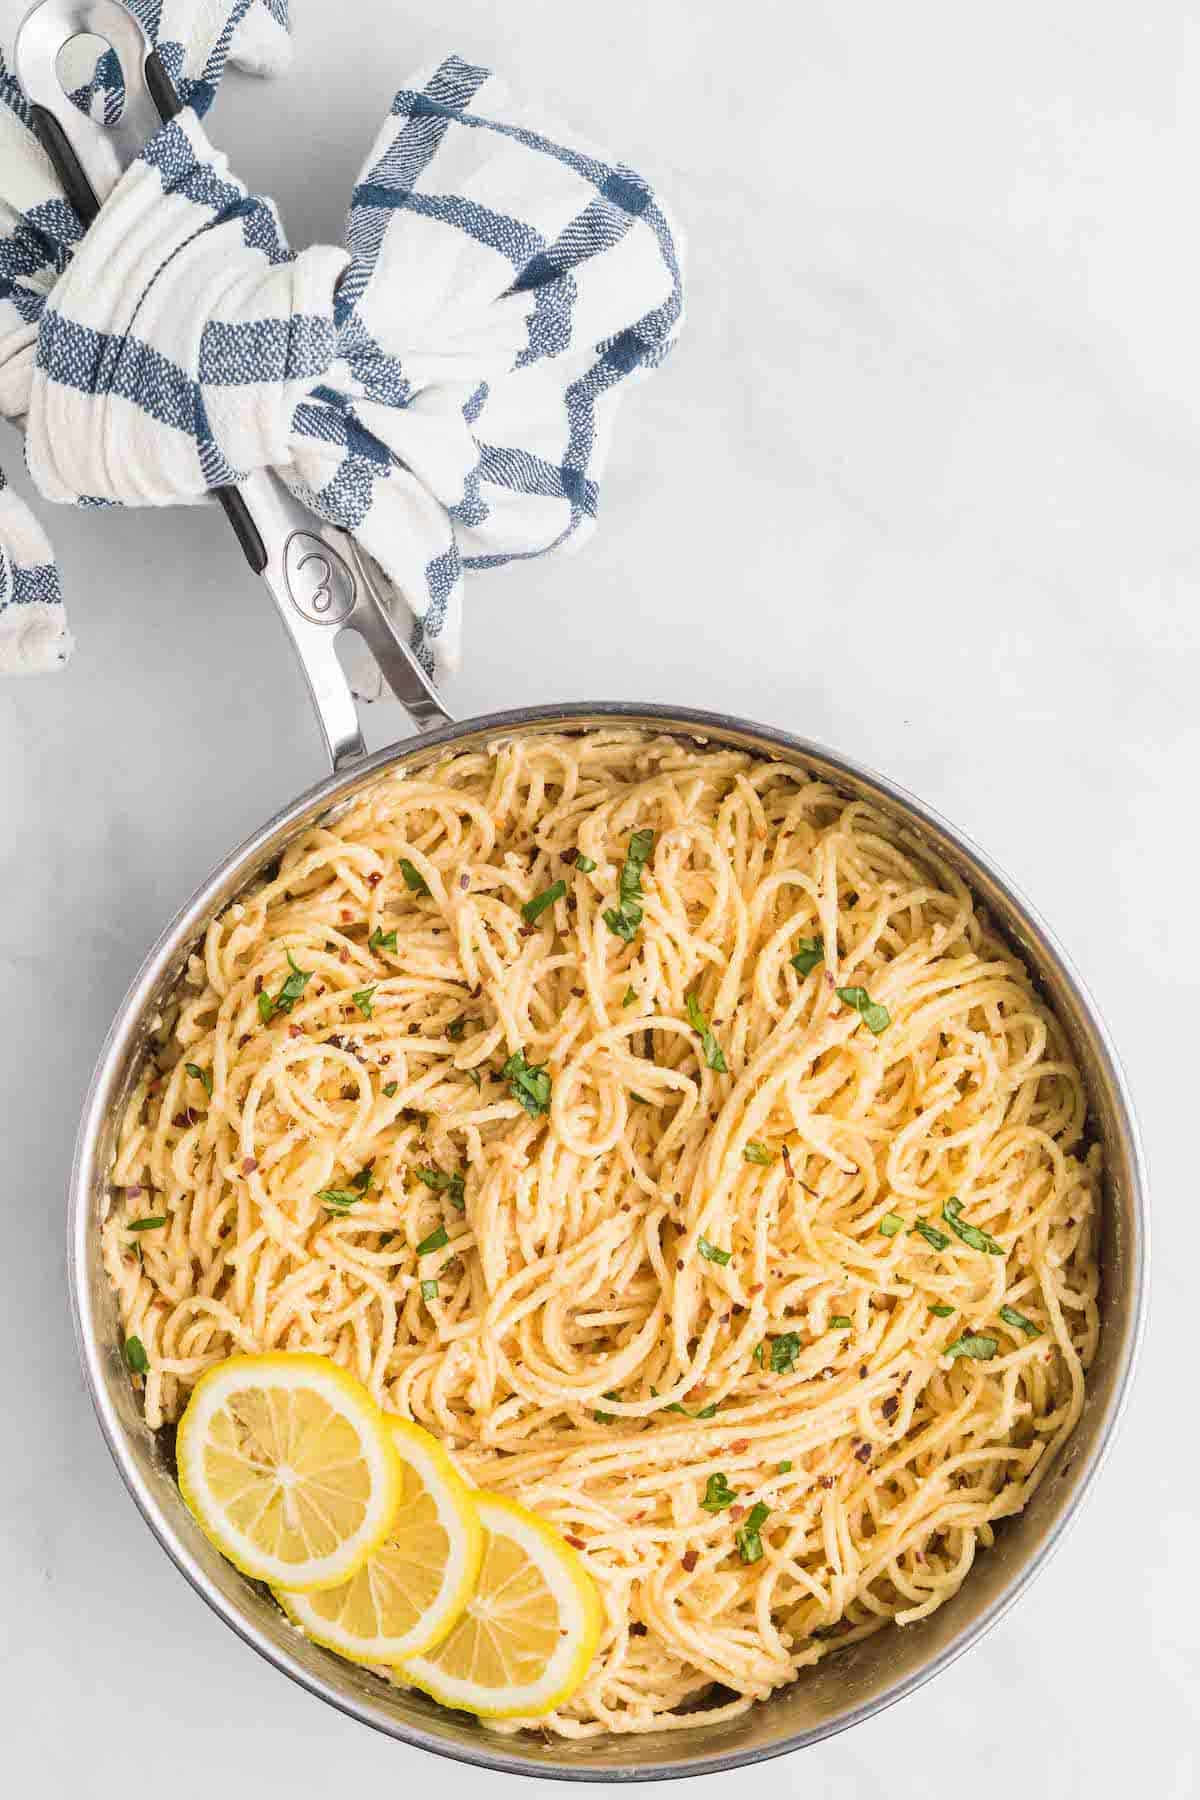 skillet of creamy lemon pasta with fresh herbs on top.